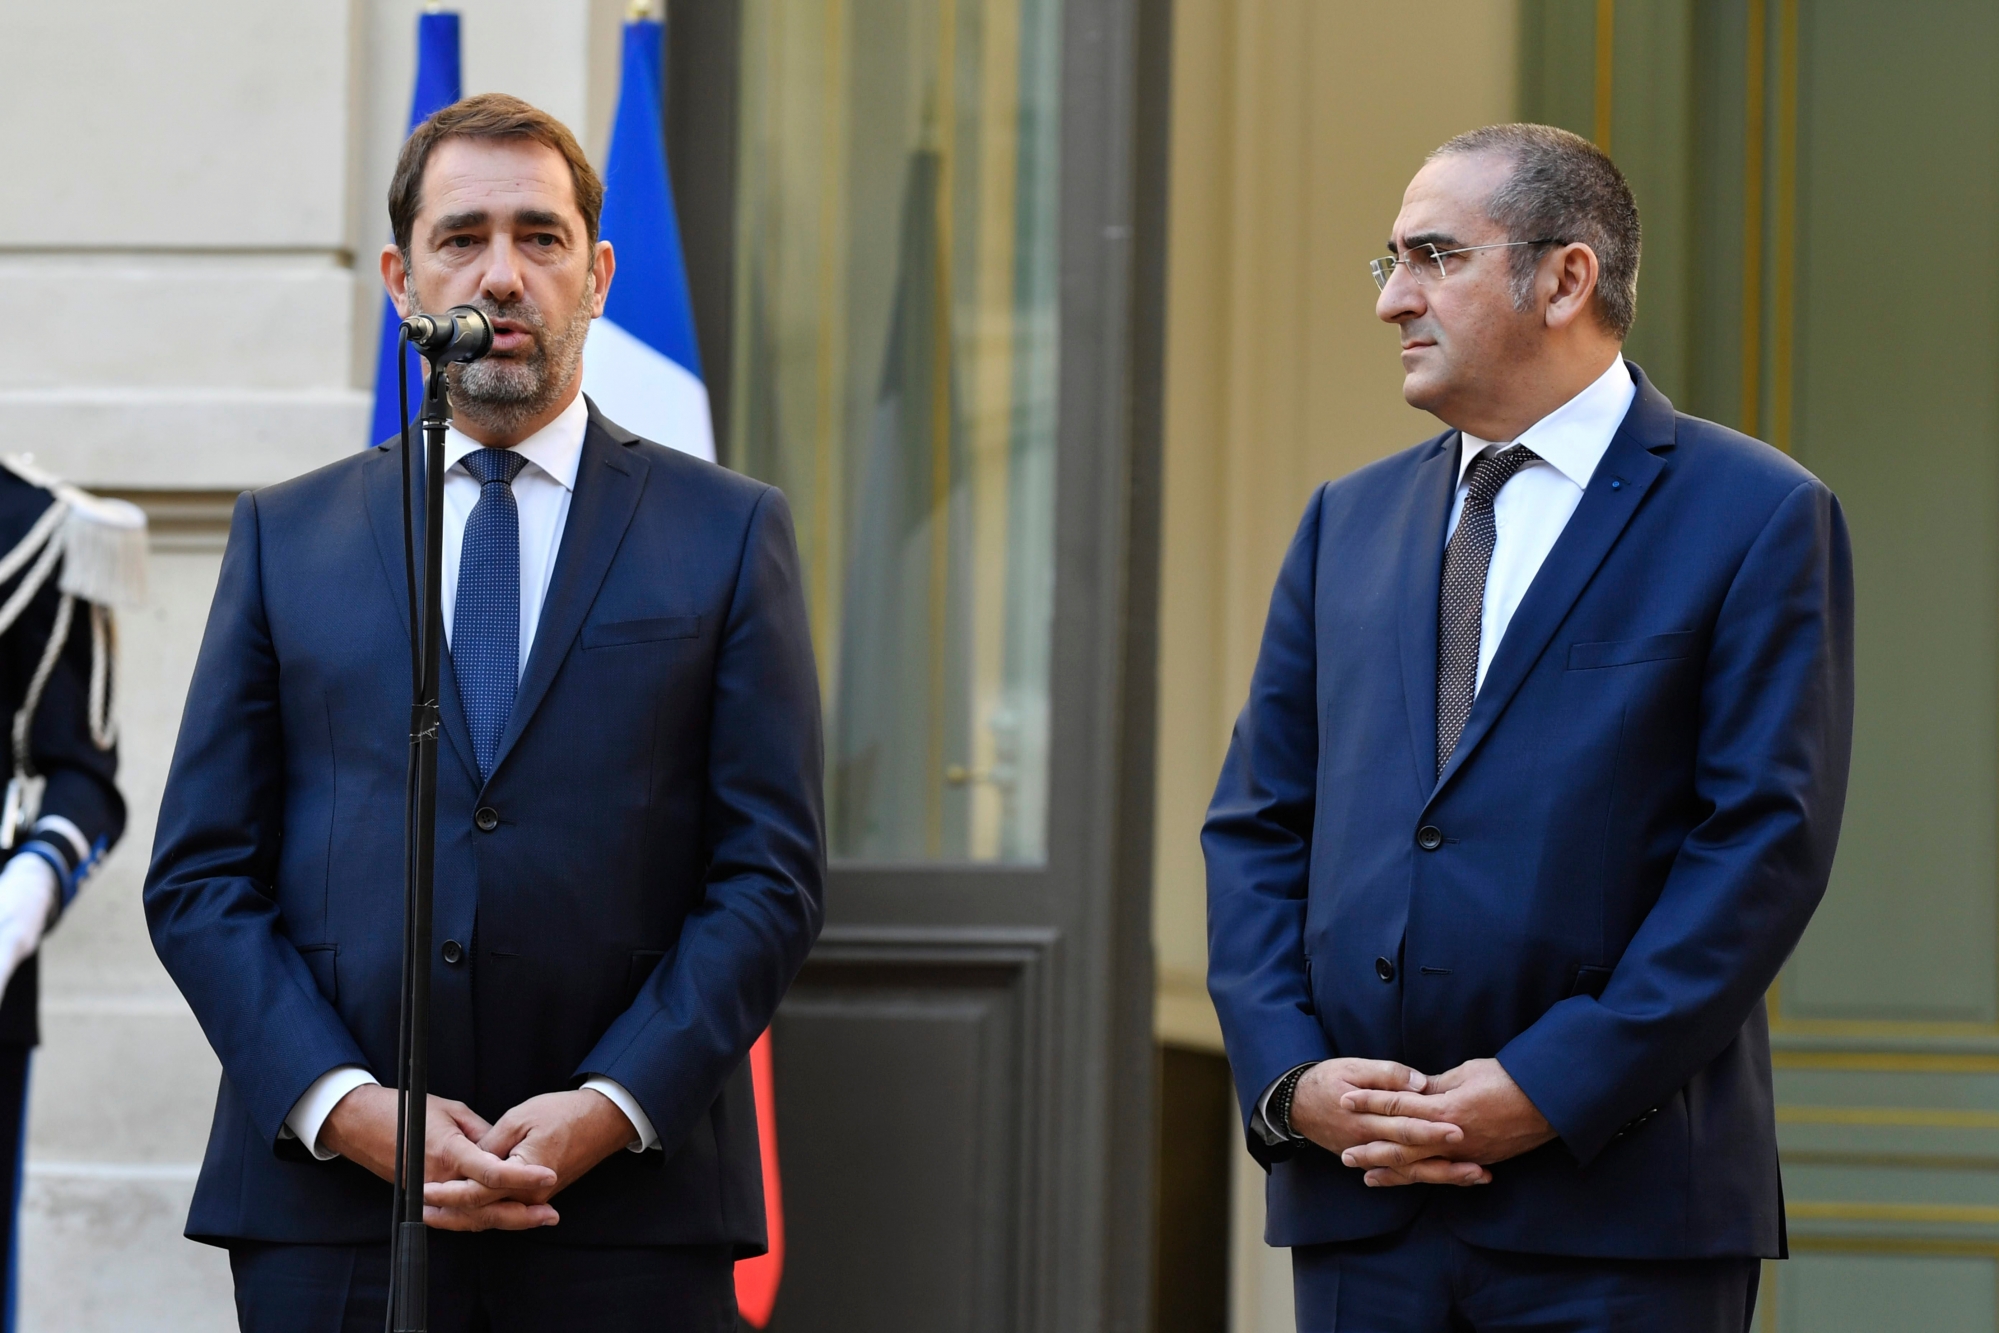 epa07096770 Newly-appointed French Interior Minister Christophe Castaner (L) and new French junior Minister Laurent Nunez (R) attend the official handover ceremony with French Prime Minister Edouard Philippe (unseen) in Paris, France, 16 October 2018. Castaner succeeds Gerard Collomb, who withdrew from the post earlier in October to run for Mayor of Lyon.  EPA/JULIEN DE ROSA FRANCE GOVERNMENT PRIME MINISTER